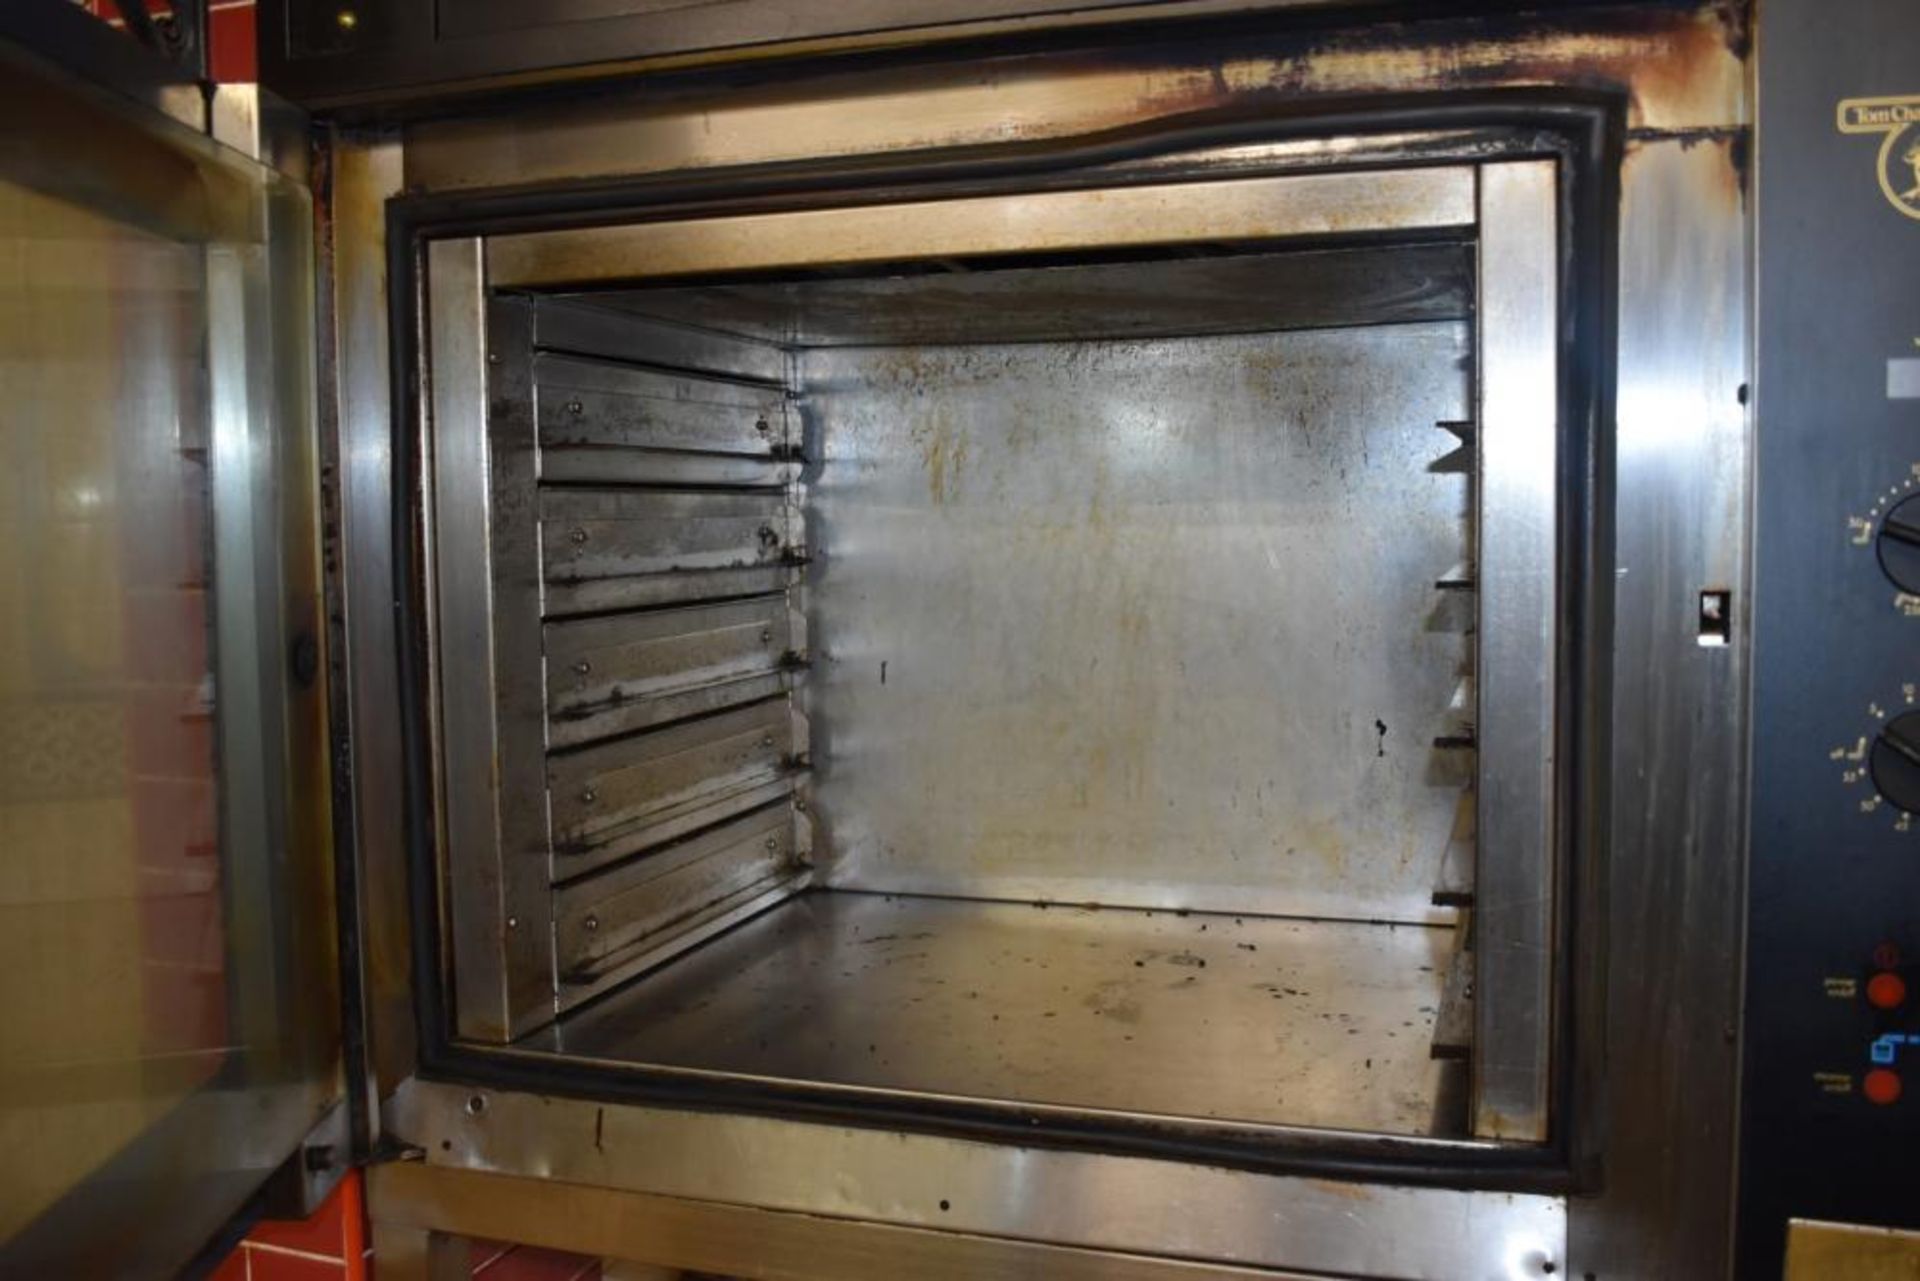 1 x Tom Chandley Double C5 60X40 Pie Oven With Stainless Steel Baking Tray Prep Bench - CL455 - Ref - Image 17 of 18